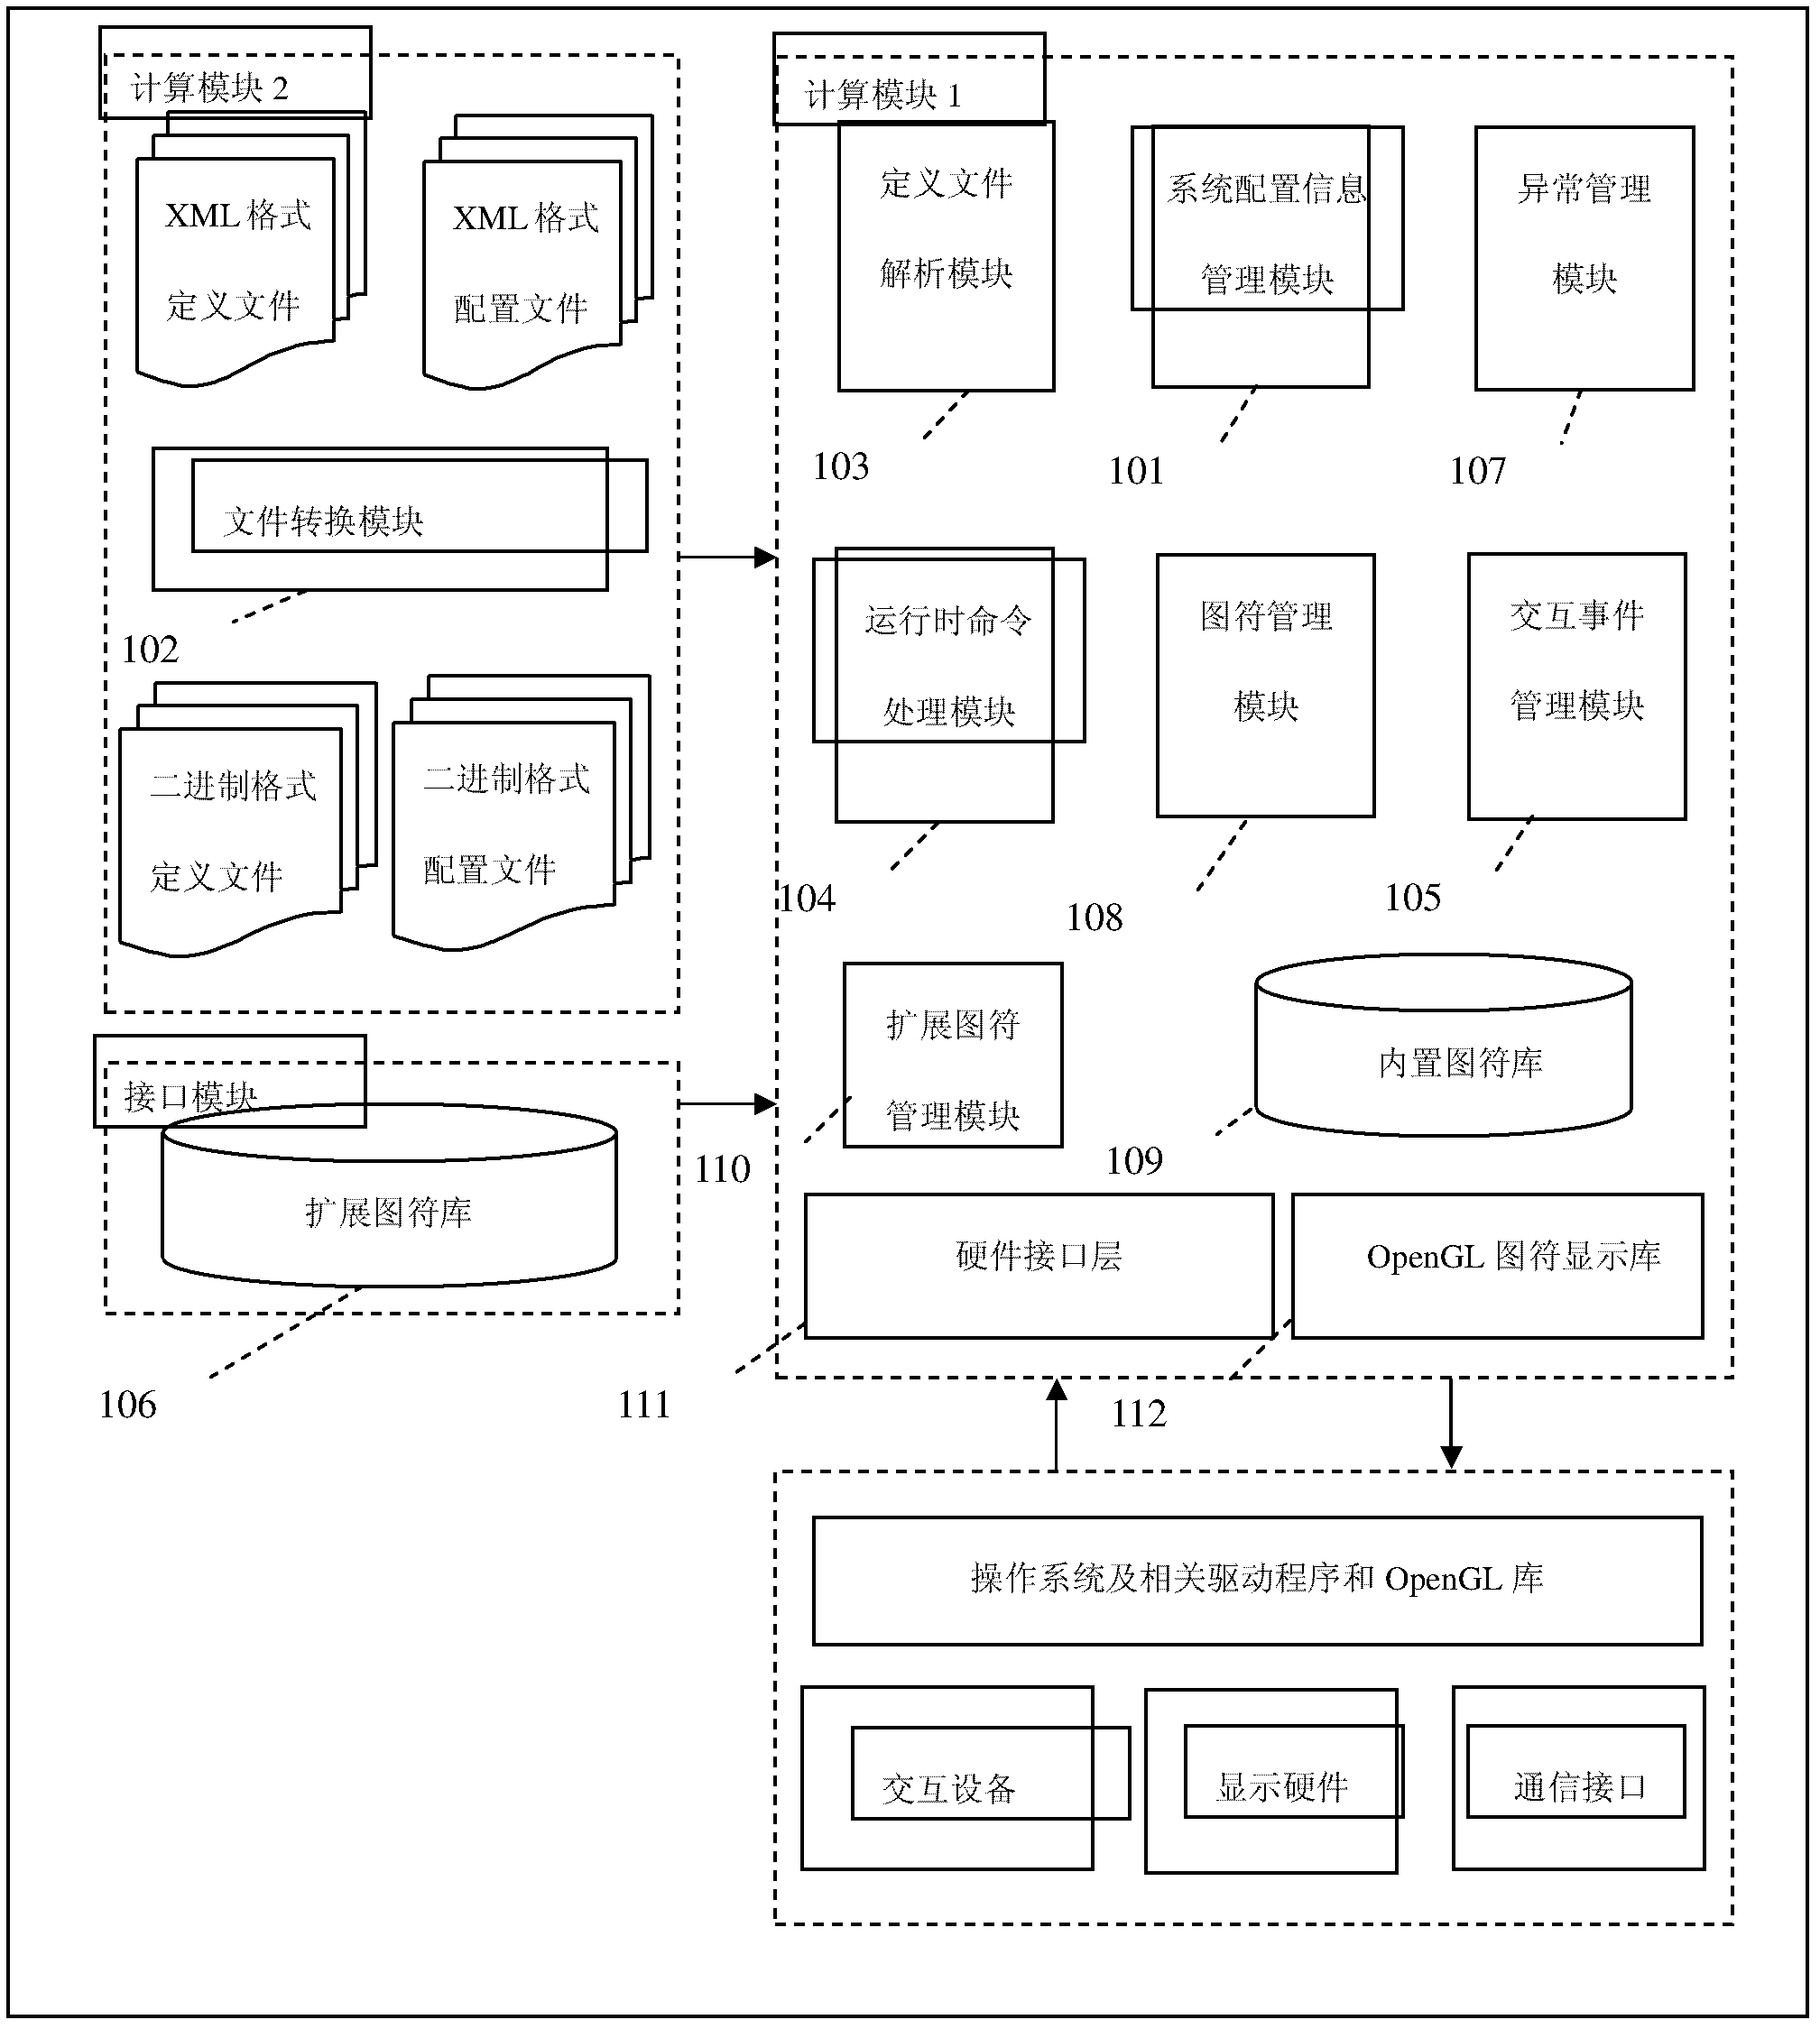 Universal cockpit display management system and method for developing corresponding display and control systems